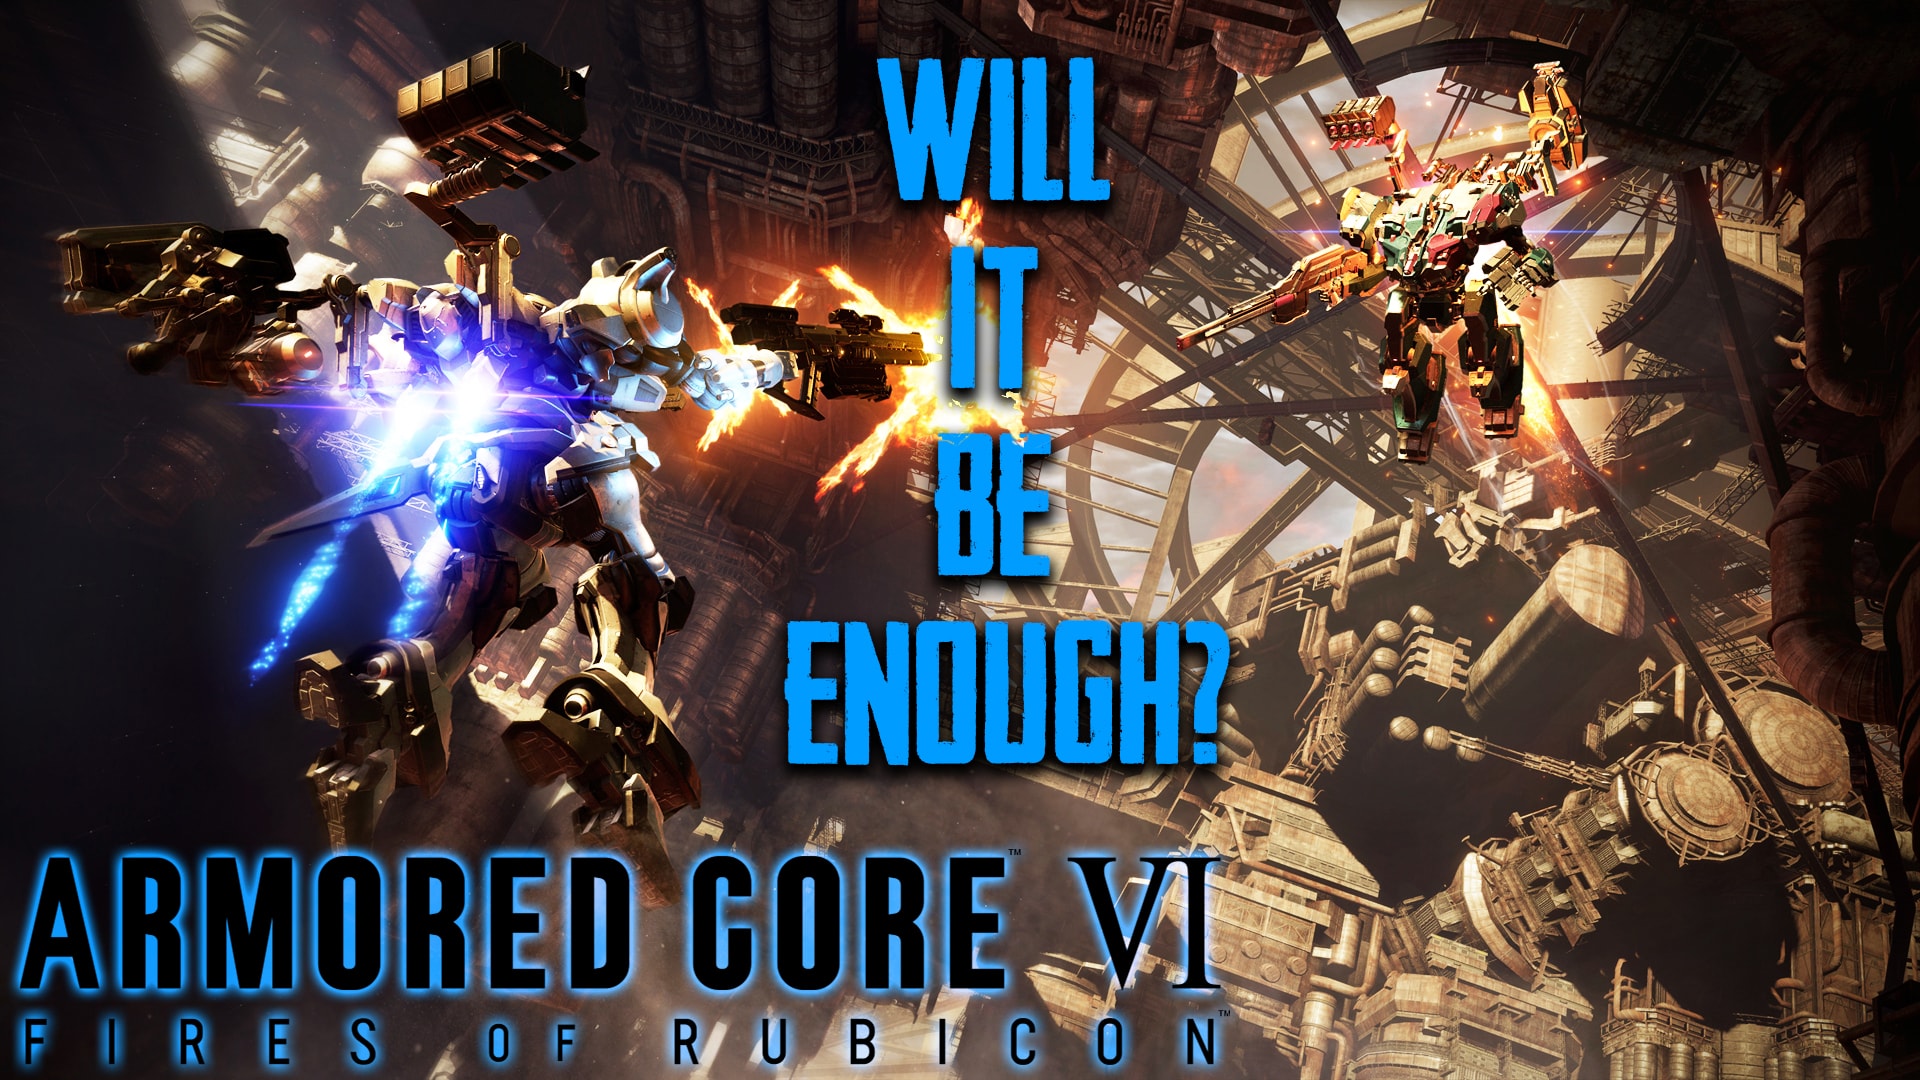 Five Things You Should Know Before Playing Armored Core VI Fires of Rubicon  - Xbox Wire